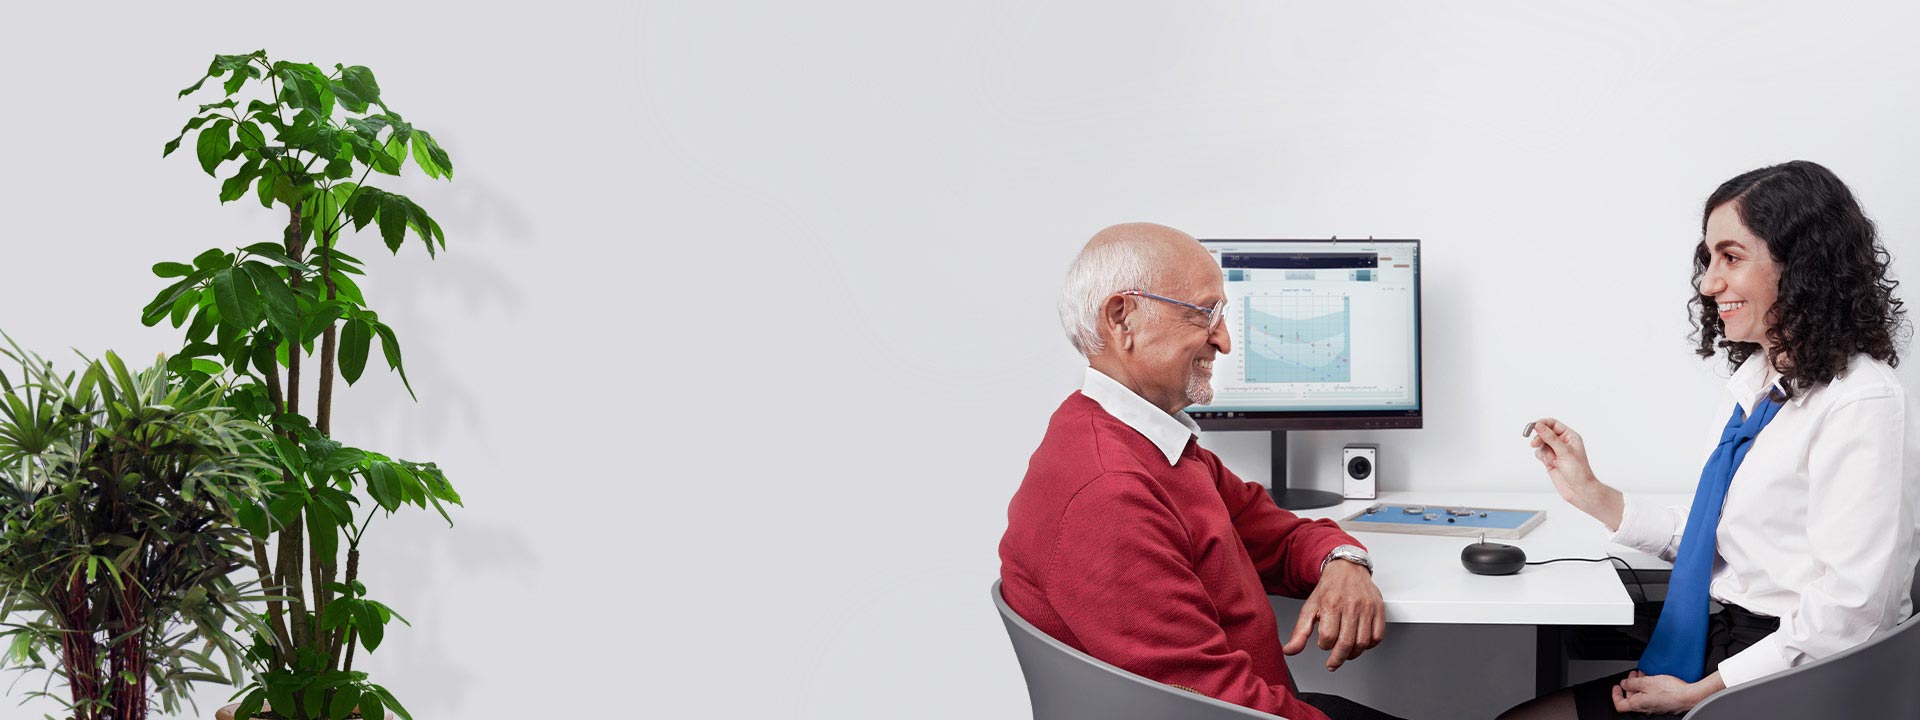 Image shows an audiologist talking to a person with hearing loss  in front of a screen showing an audiogram